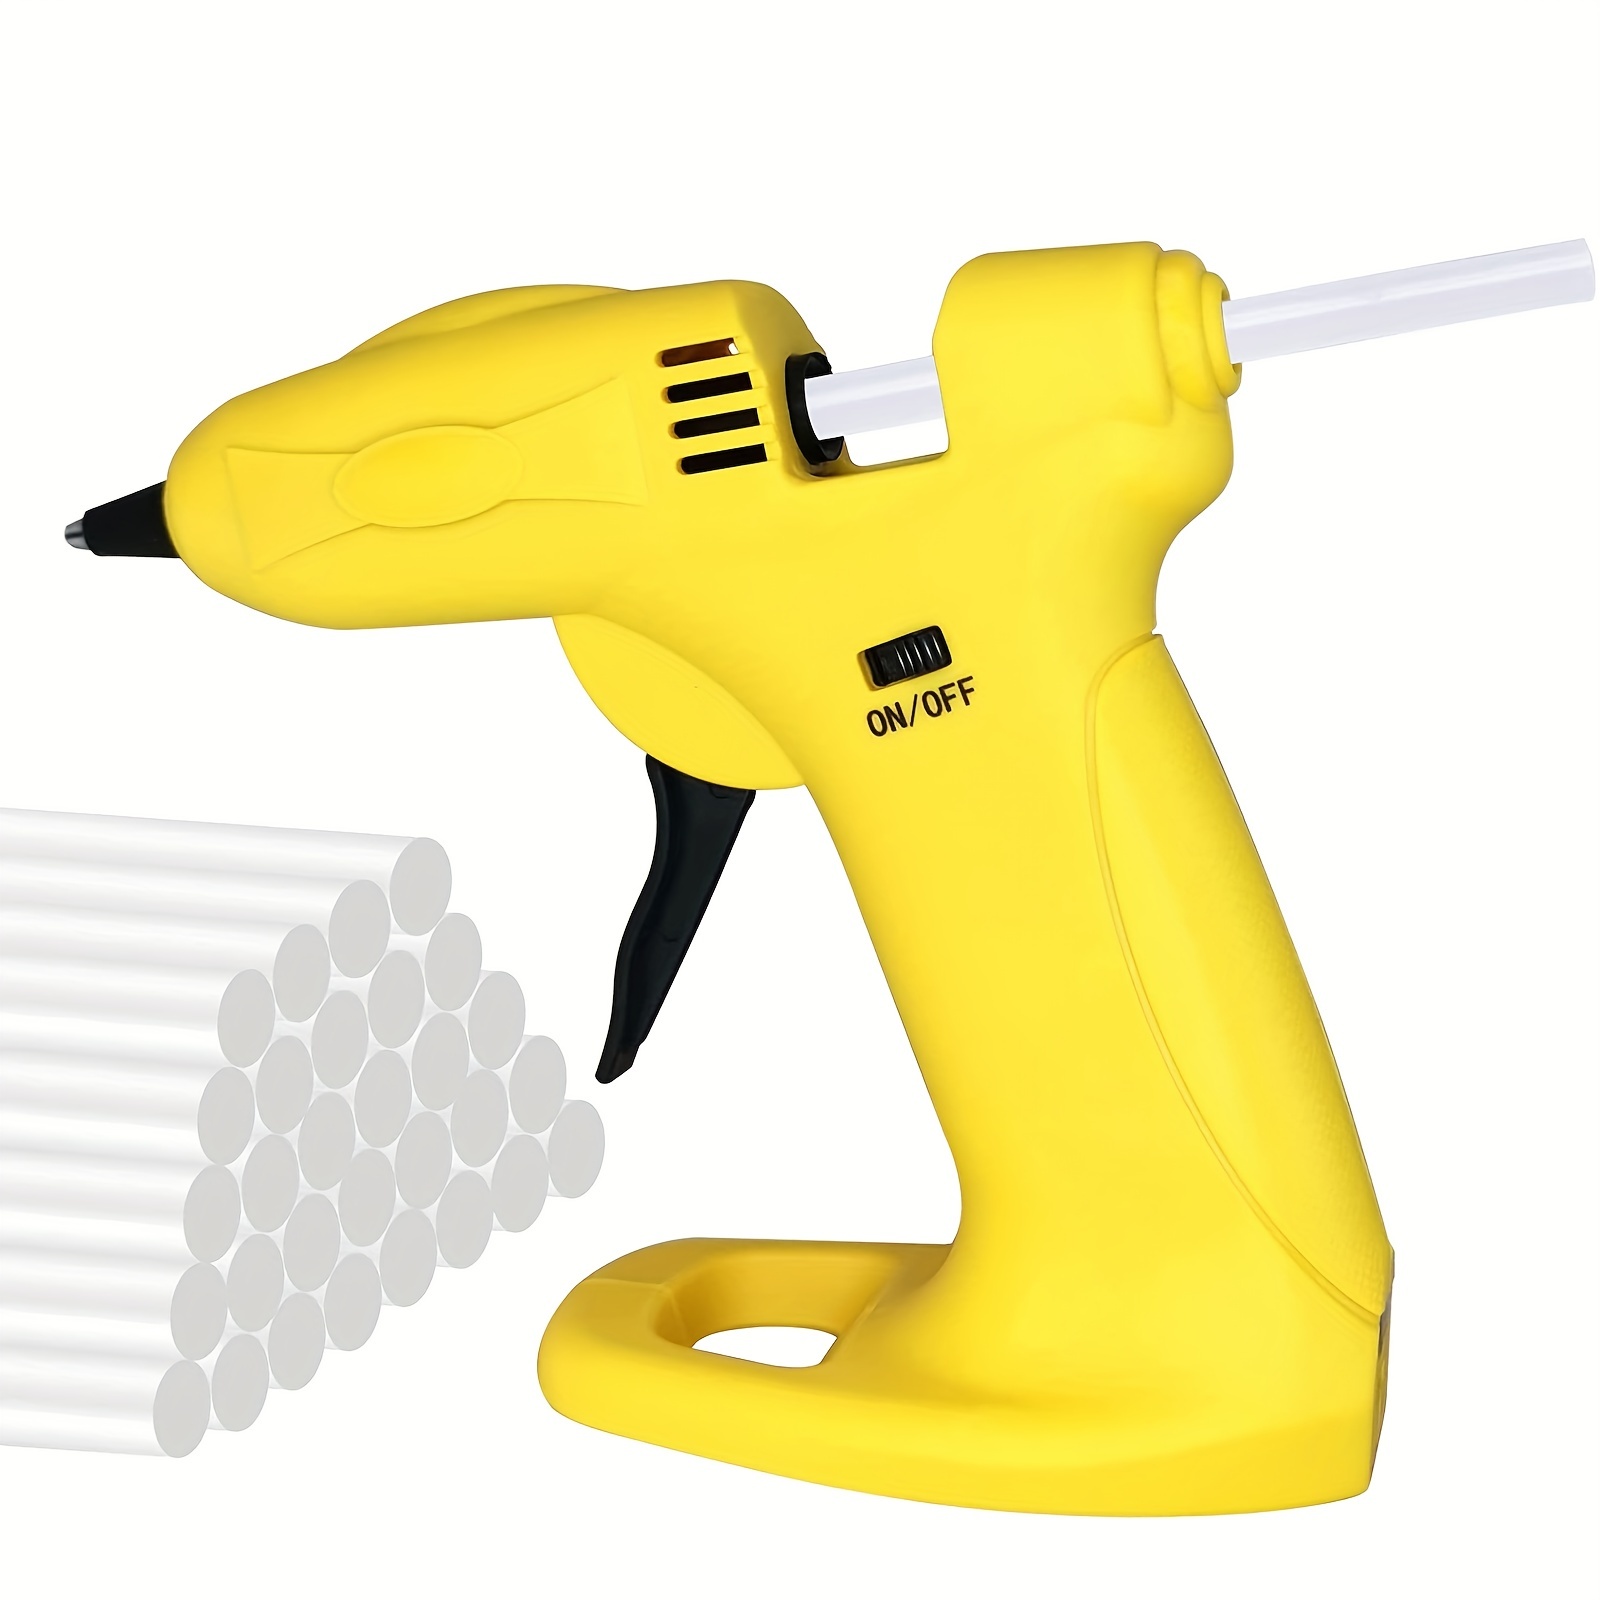 How To Make Rechargeable Glue Gun At Home 